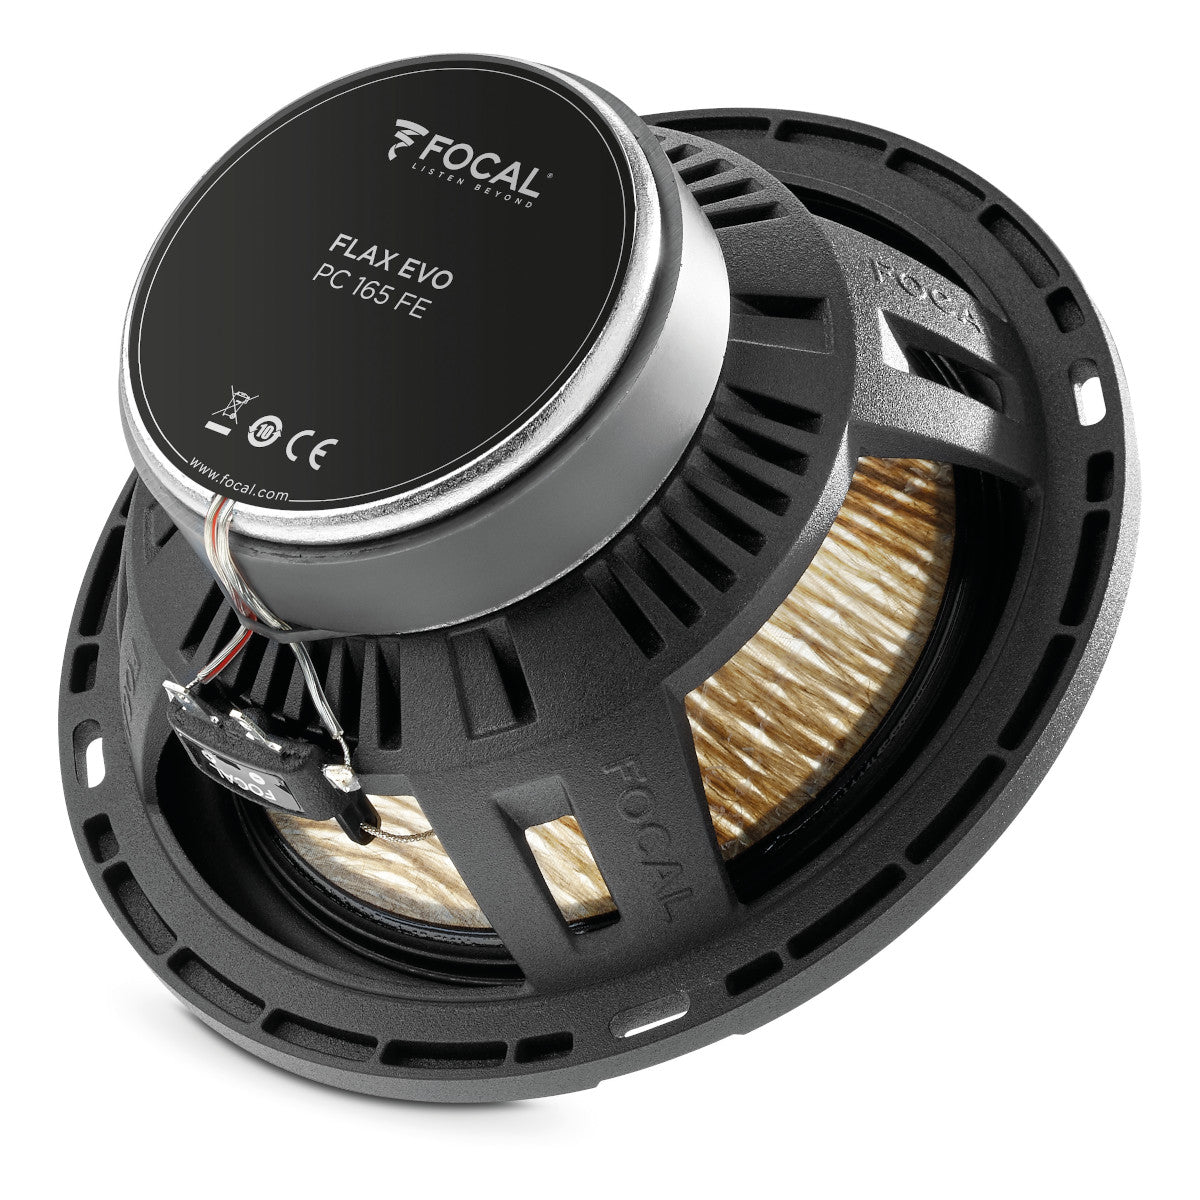 Focal PC 165 FE 6-1/2" Expert Flax Evo 2-Way Coaxial Speakers